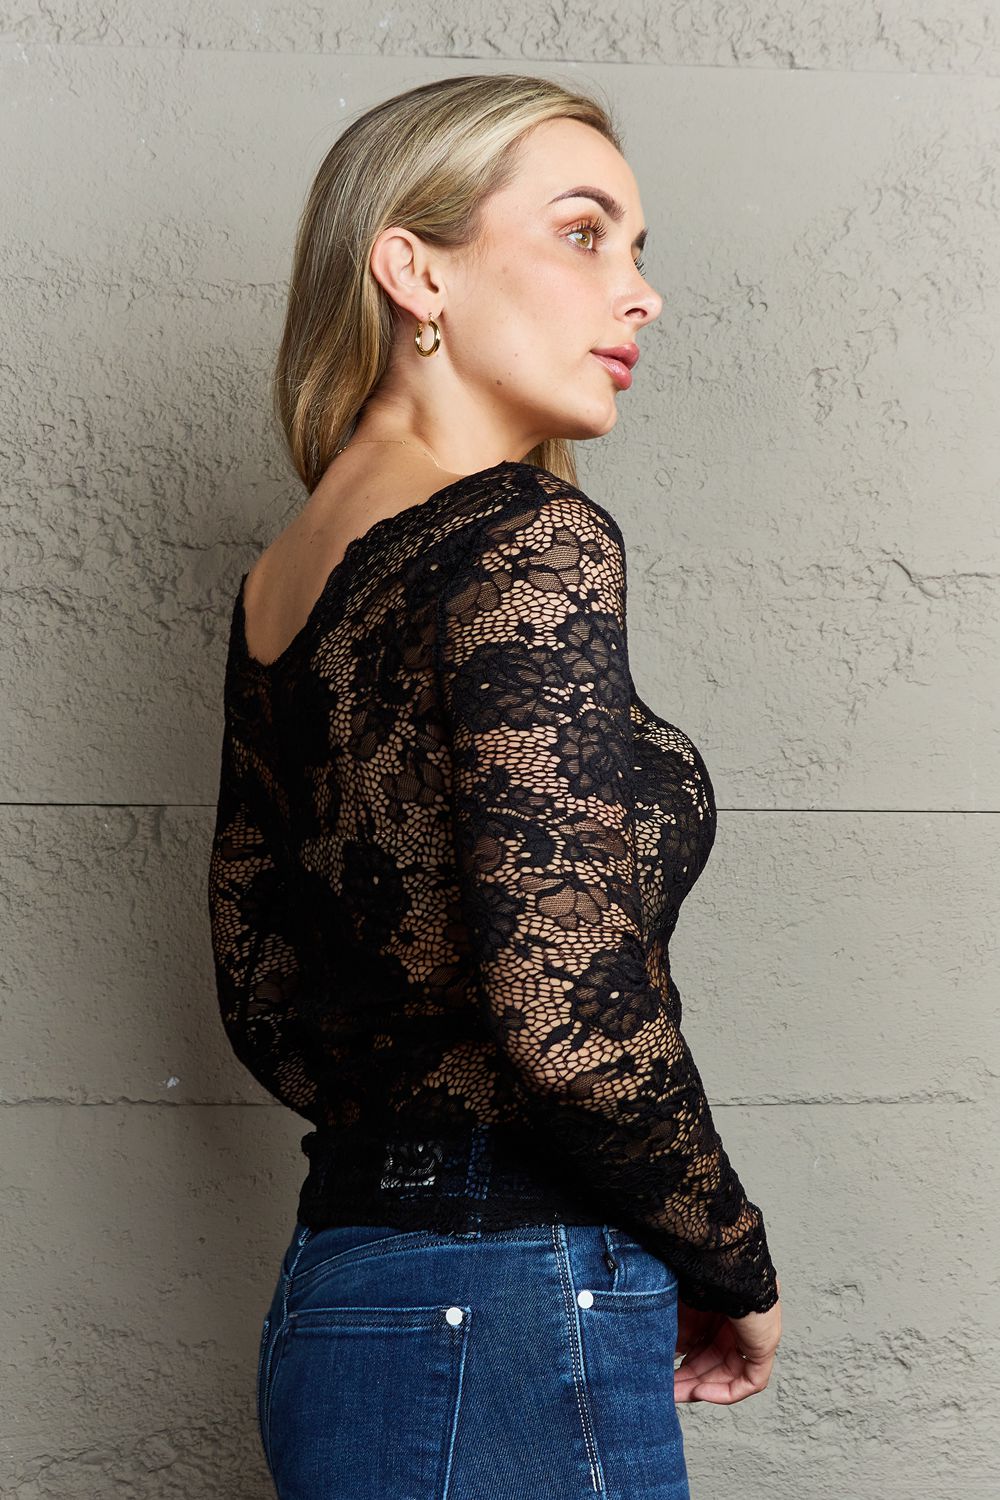 GOODNIGHT TONIGHT OFF THE SHOULDER LACE TOP